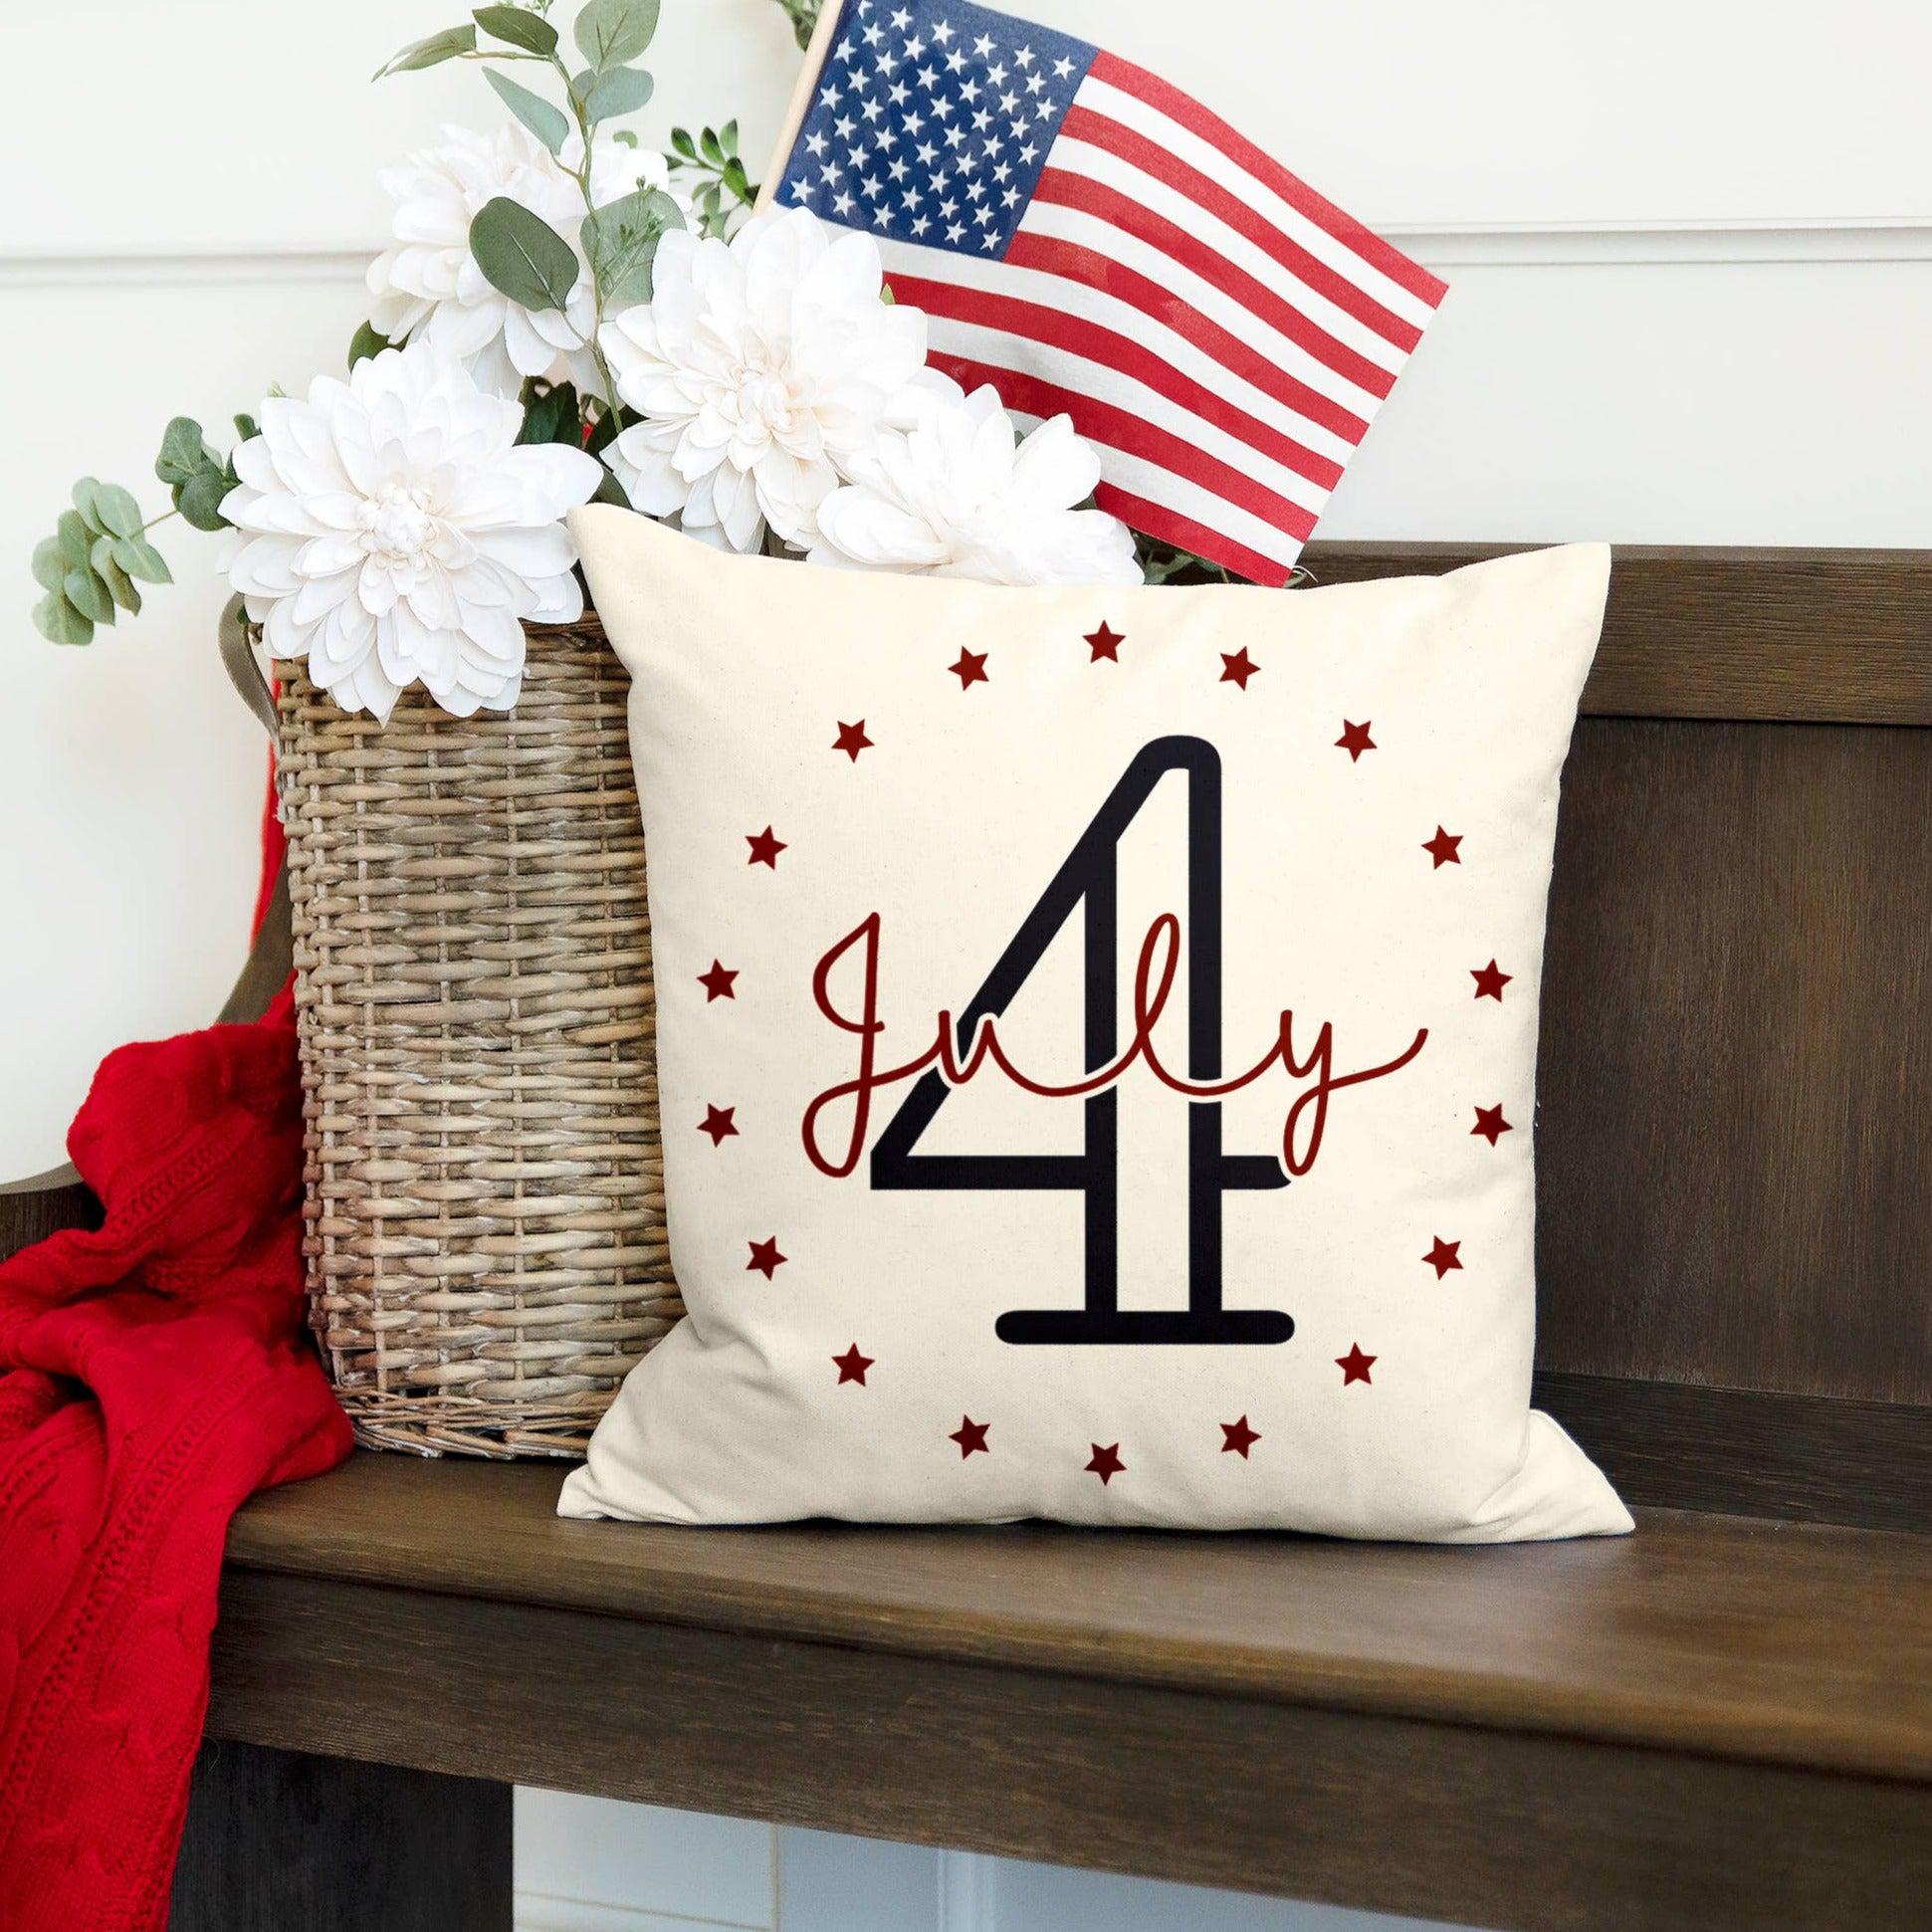 July 4th Pillow Cover 18x18 inch-Pillows-tbgypsysoul